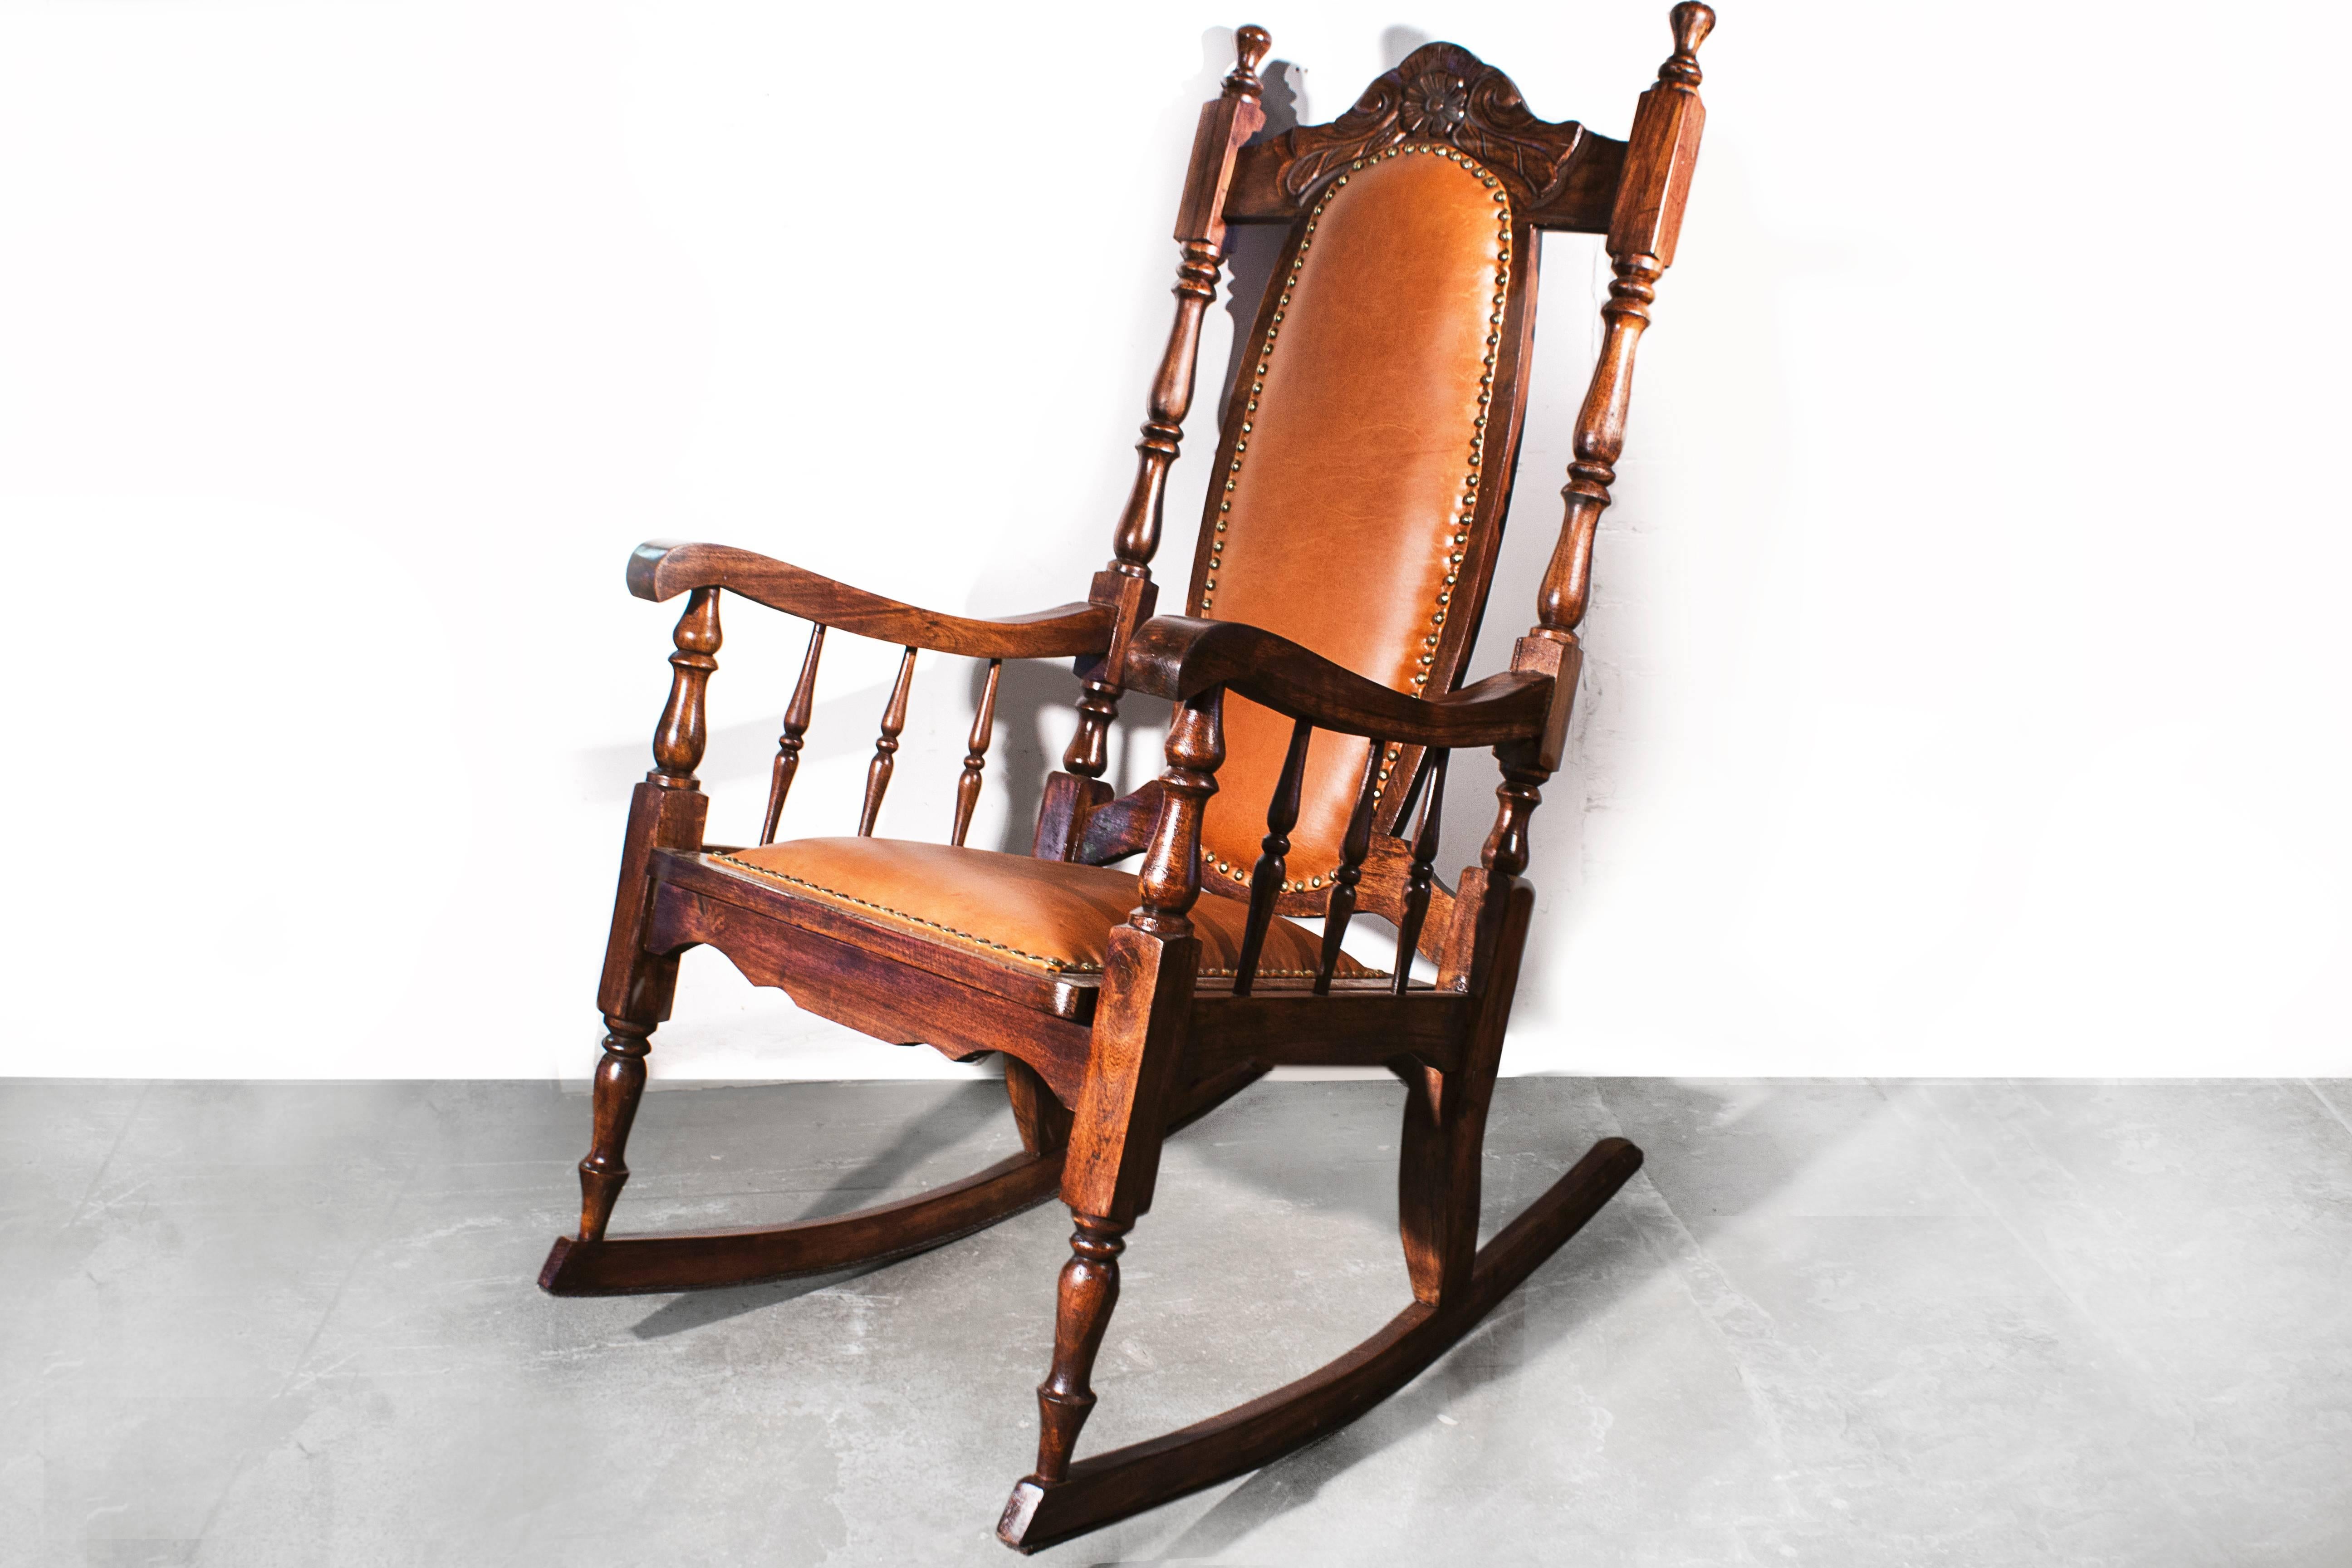 Antique oak rocking chair with hand-carved frame and spindle arms. Original caning has been replaced with new high quality leather and upholstery tacks. Rockin' in comfort. 

26